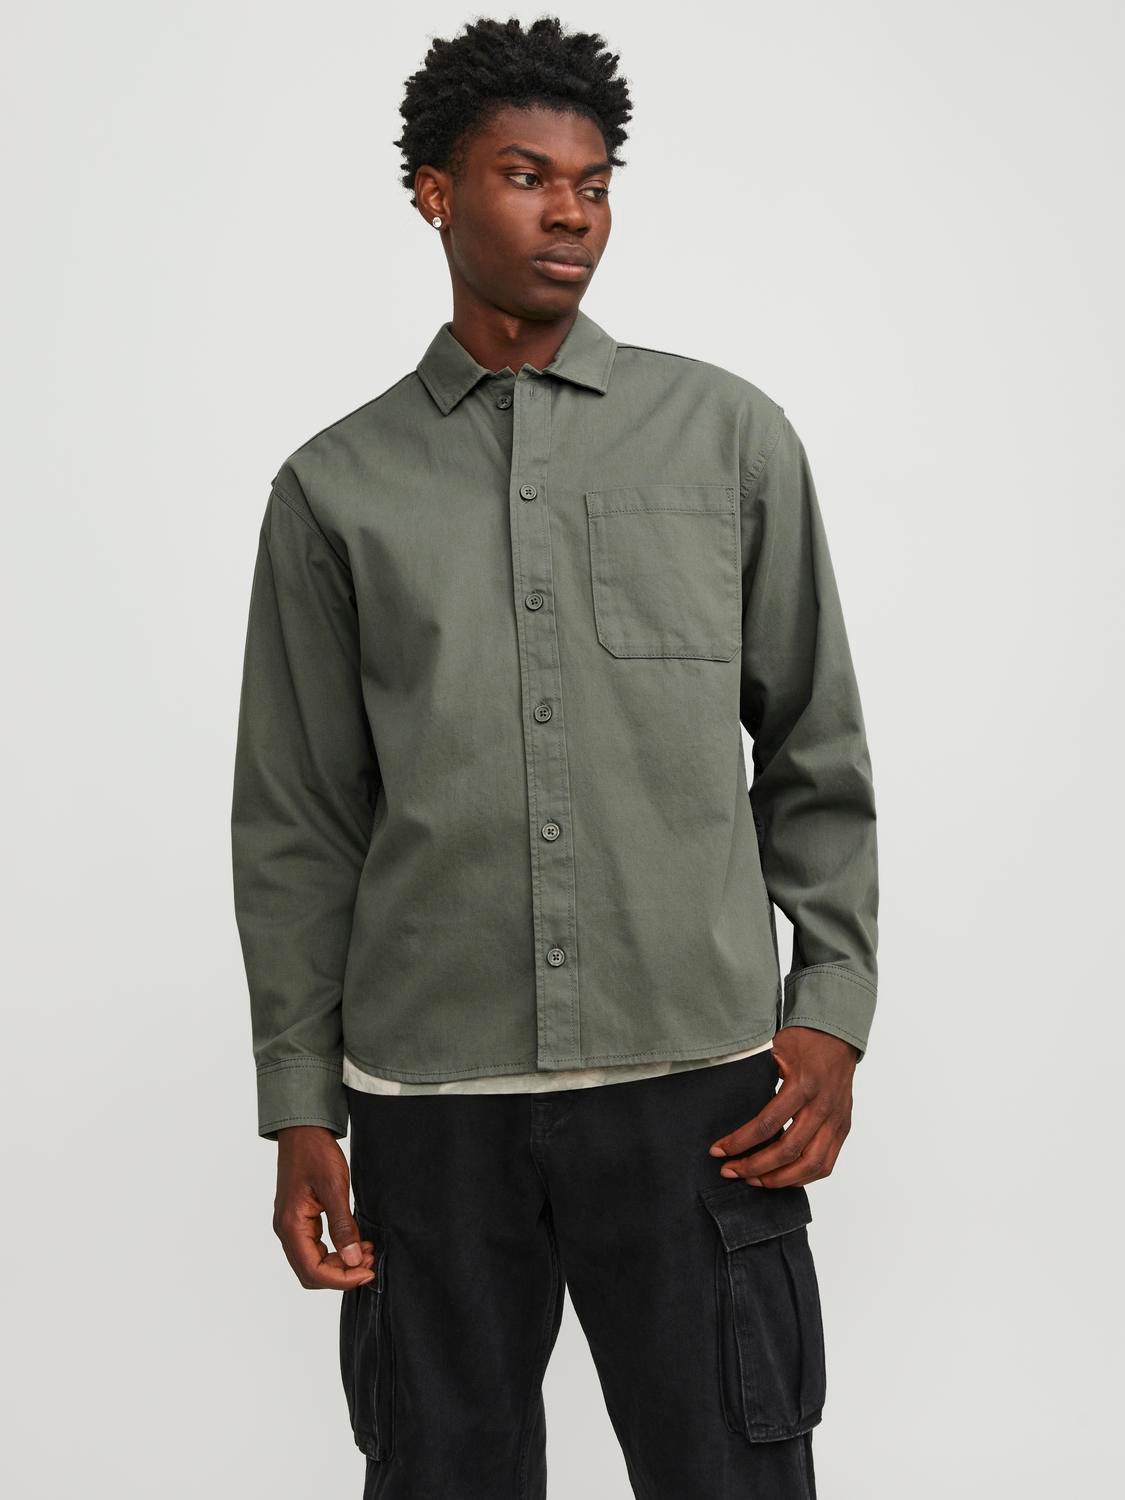 Jack & Jones Casaco Relaxed Fit -Agave Green - 12251289